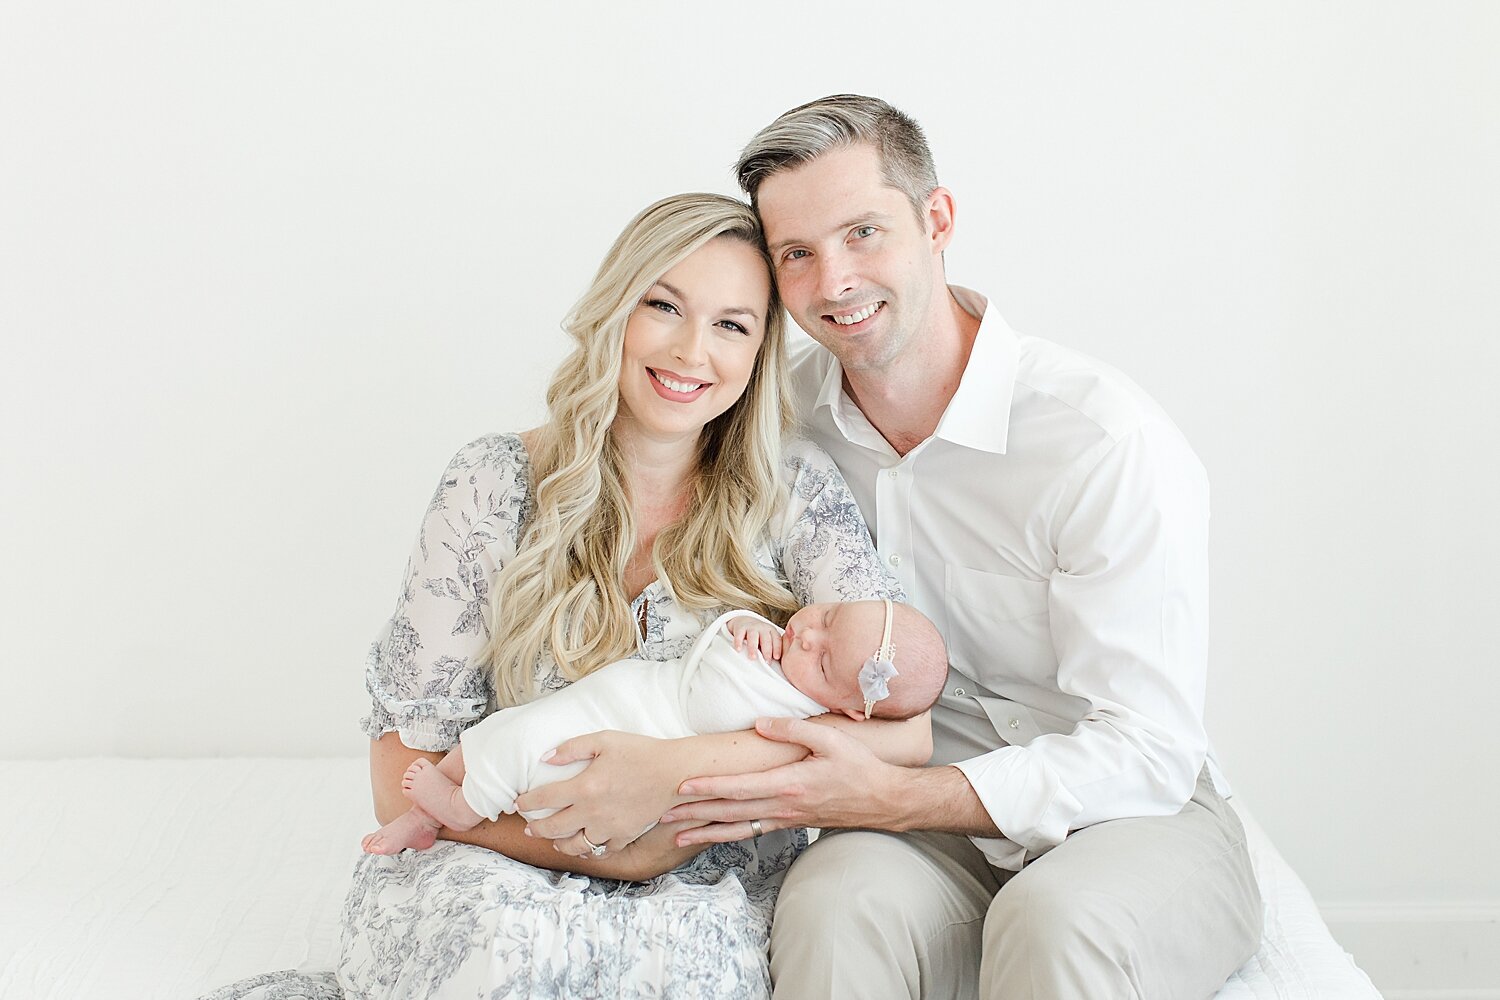 Family portrait during baby girl's newborn session in studio in Fairfield County, CT | Kristin Wood Photography